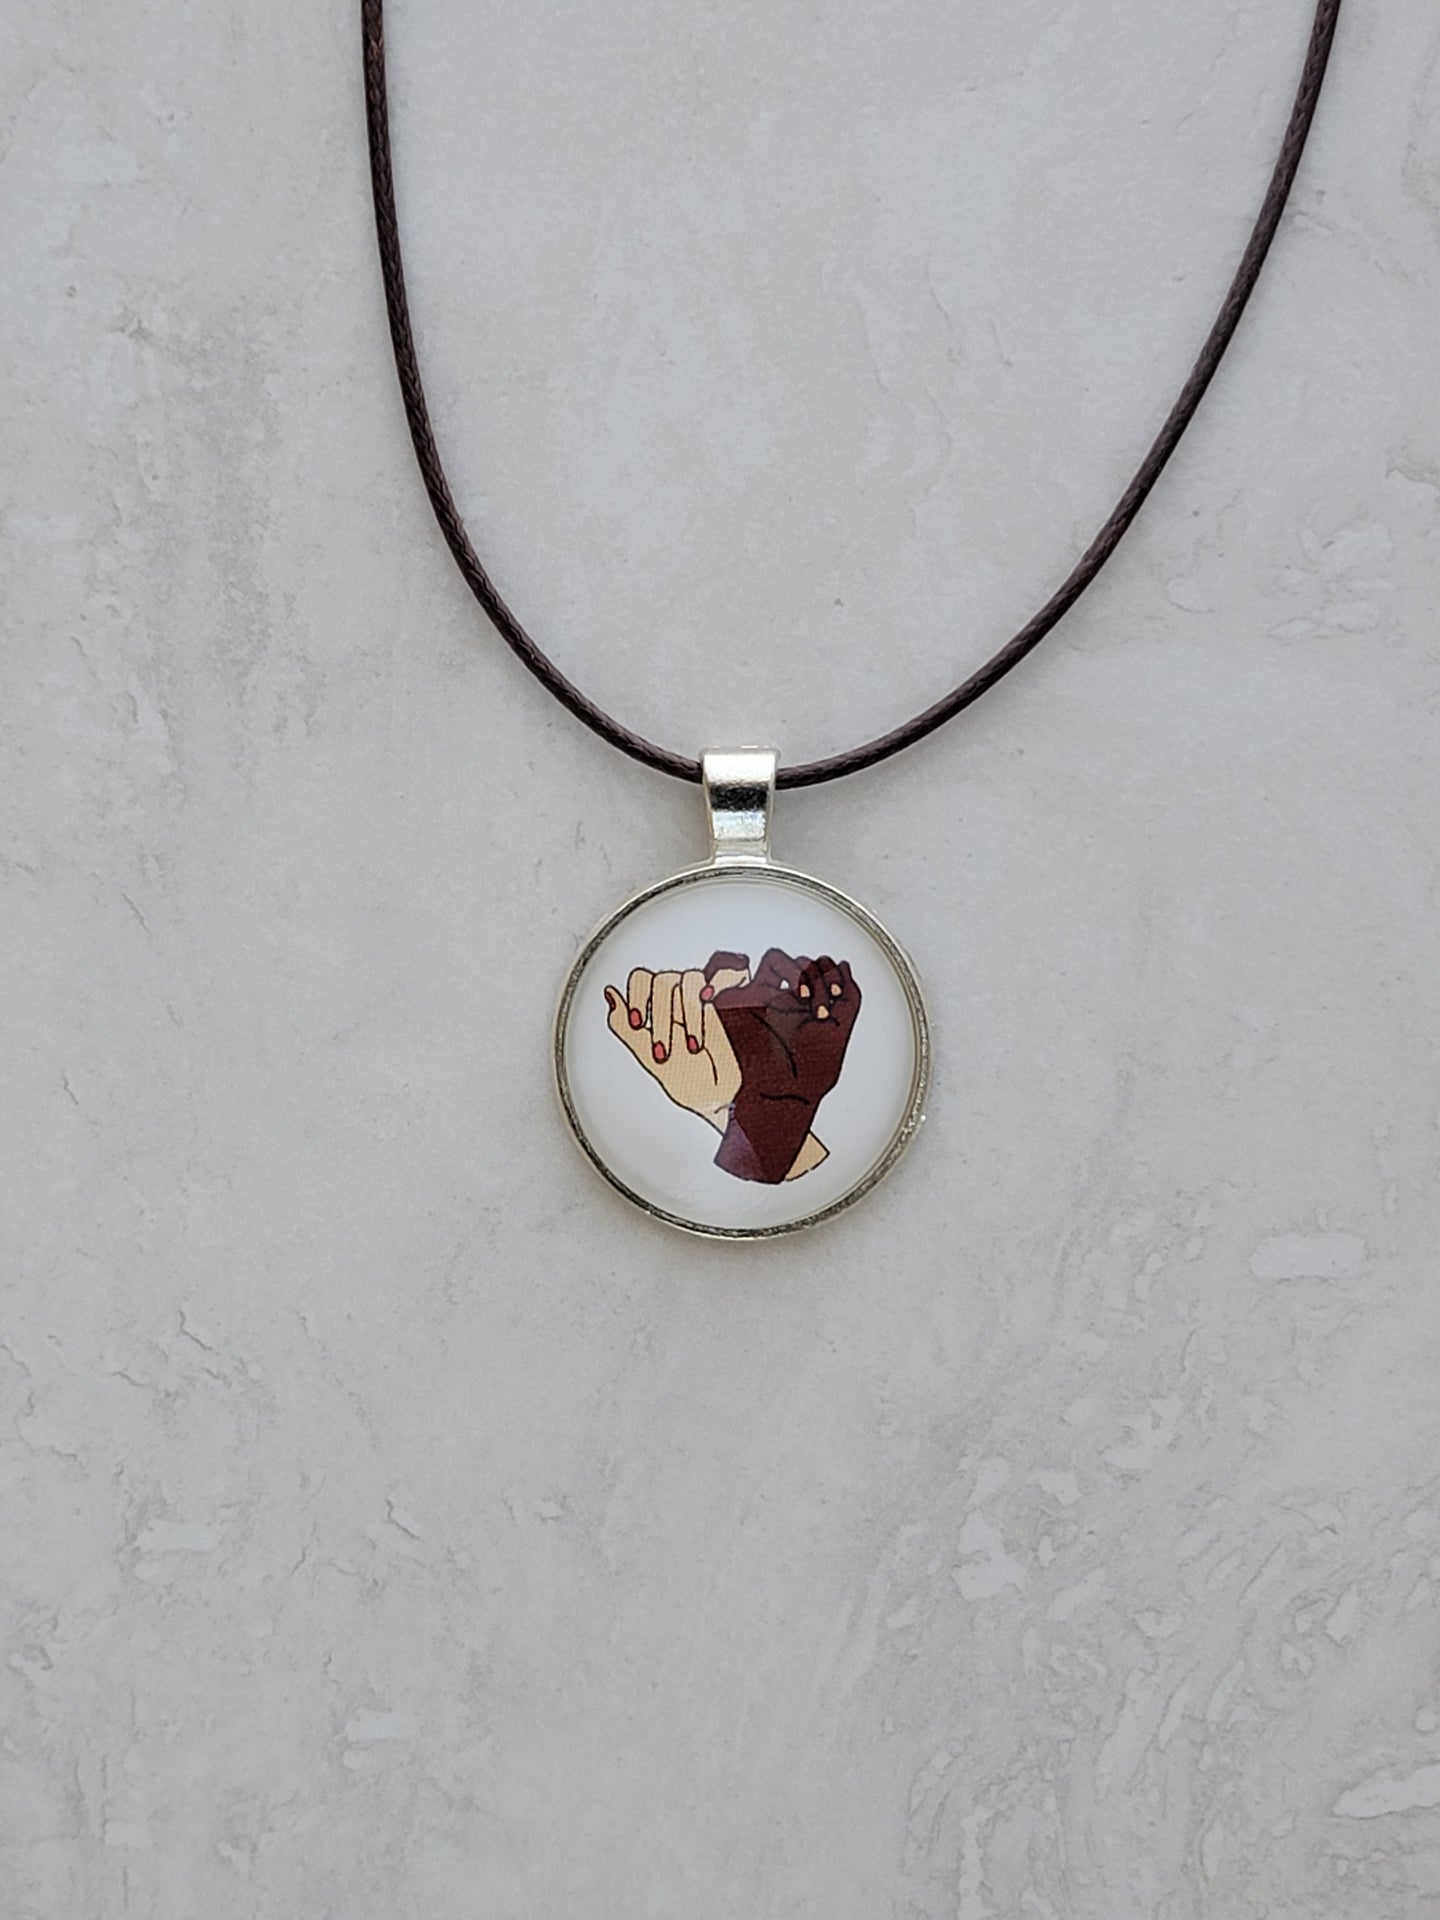 Better Together Silver Pendant Necklace - Handmade Jewelry for a Cause